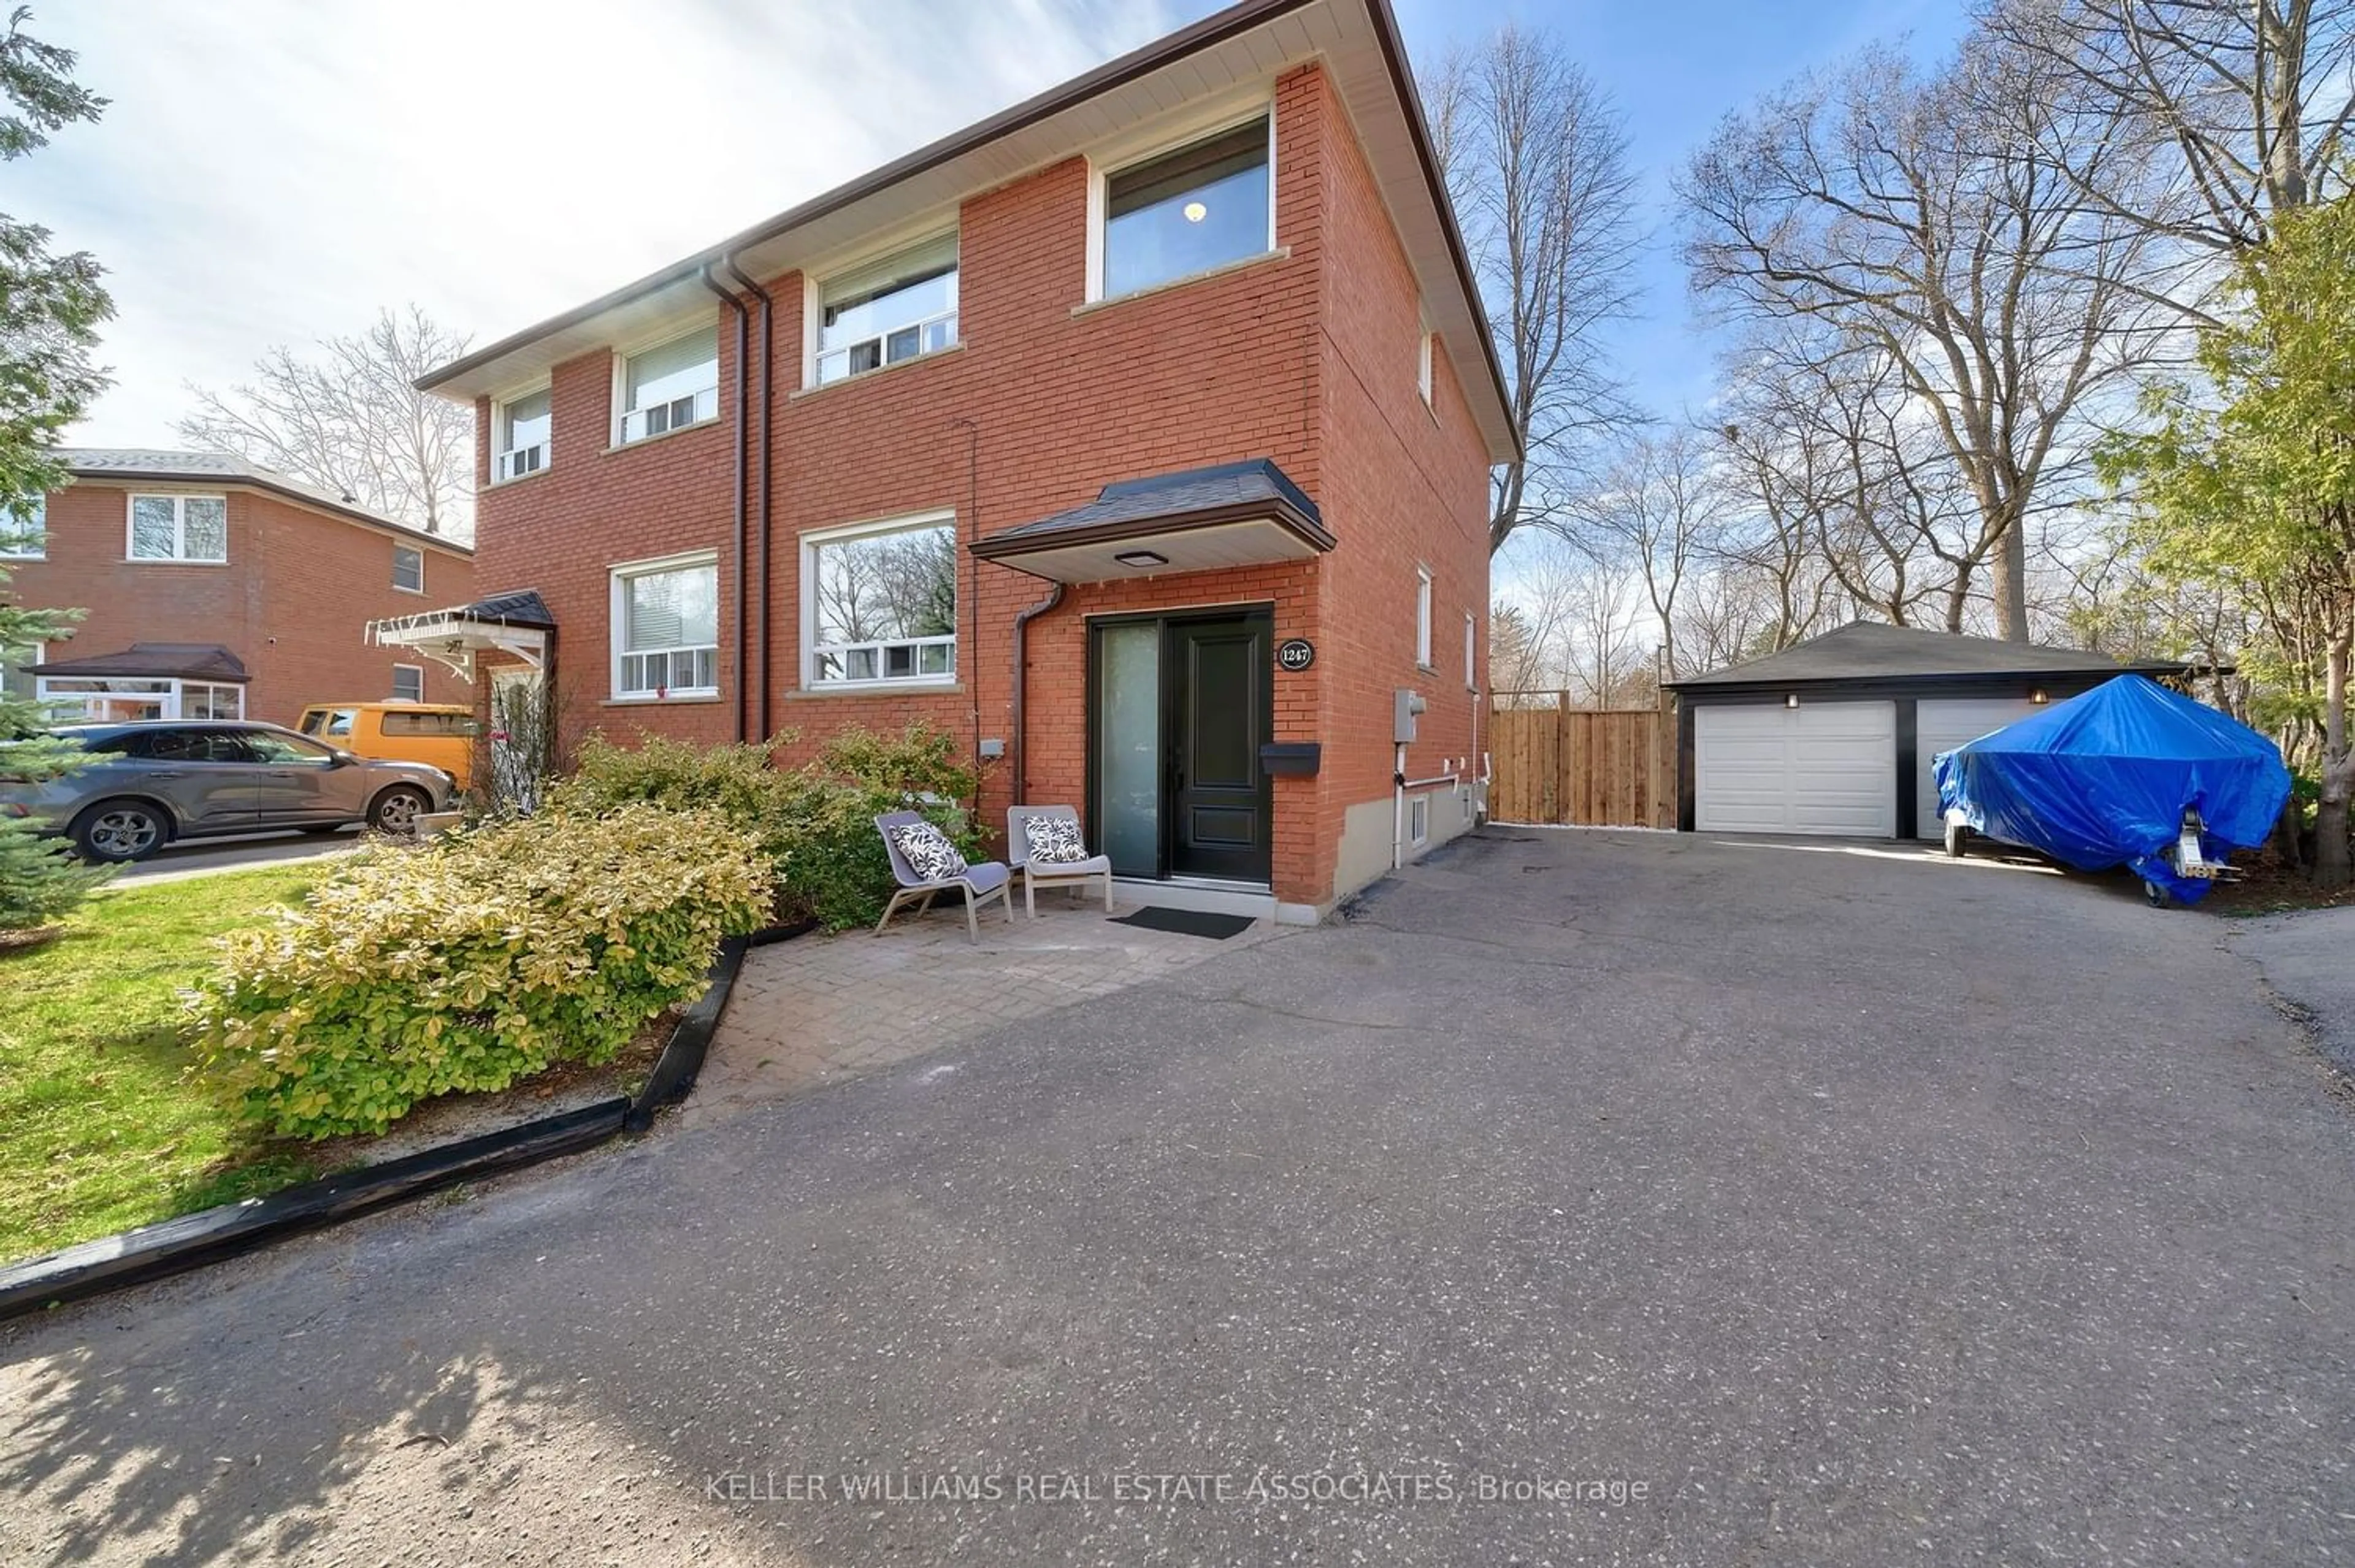 Home with brick exterior material for 1247 Bray Crt, Mississauga Ontario L5J 3S4